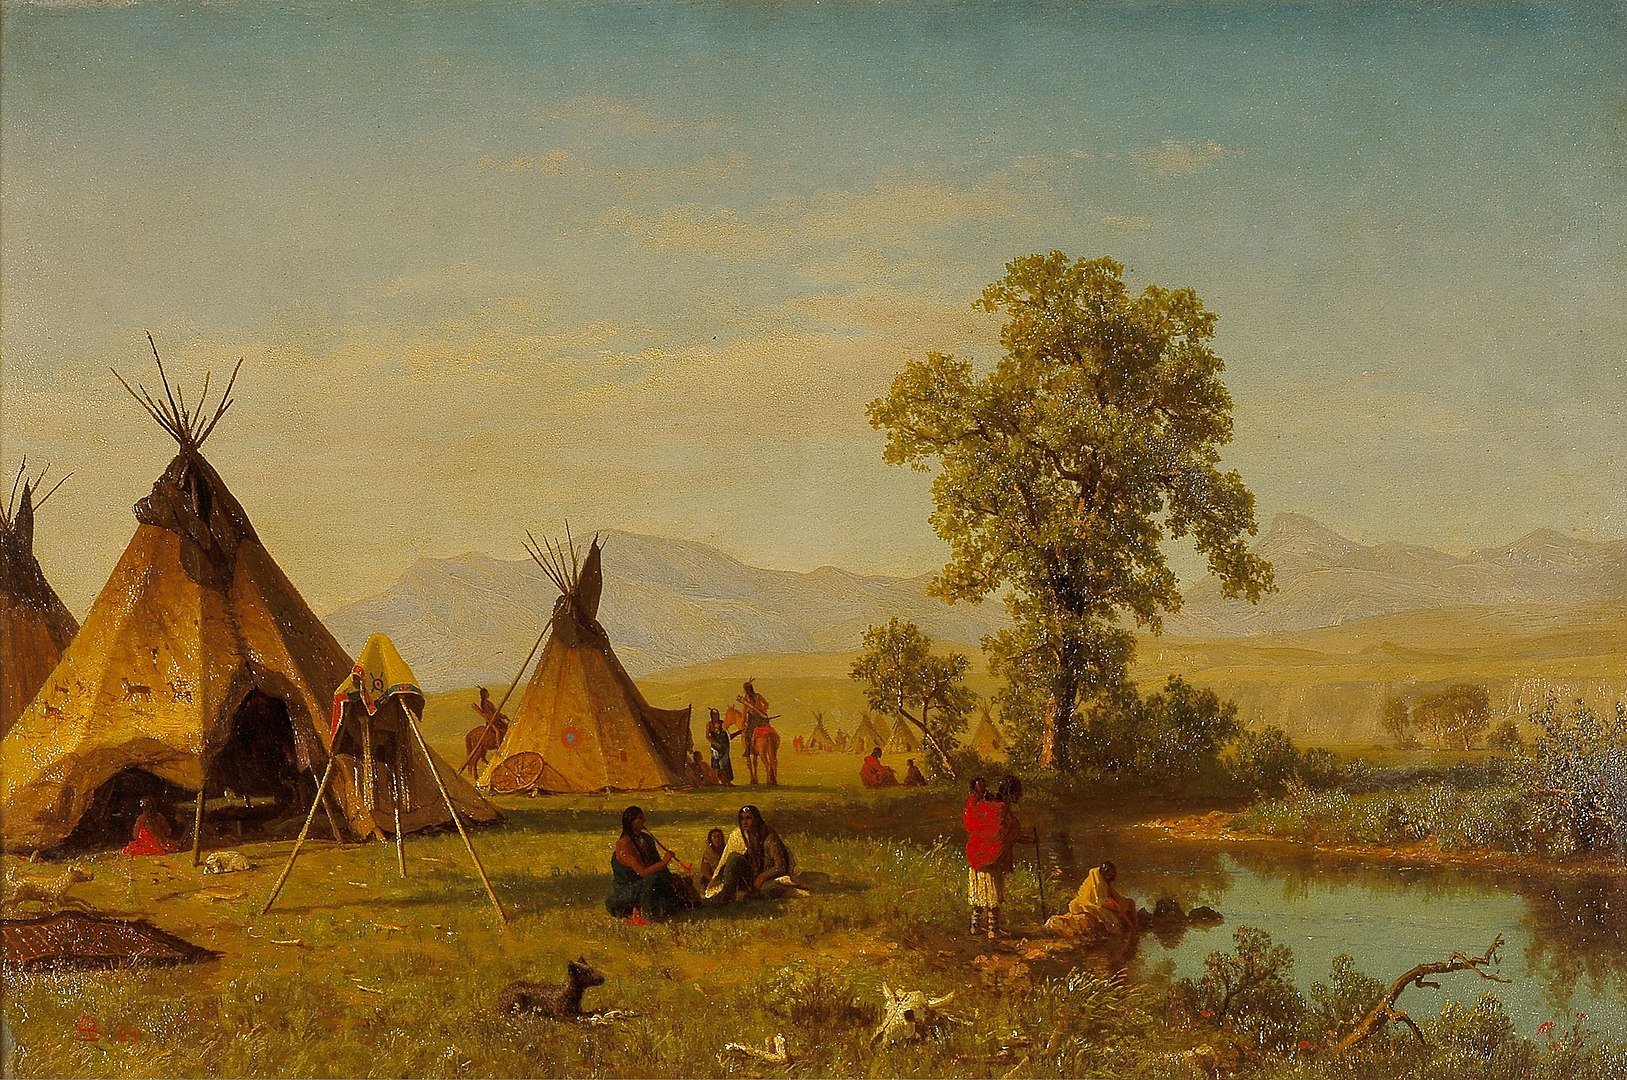 A large scene on a flat grassland depicts tipis and communities of people.